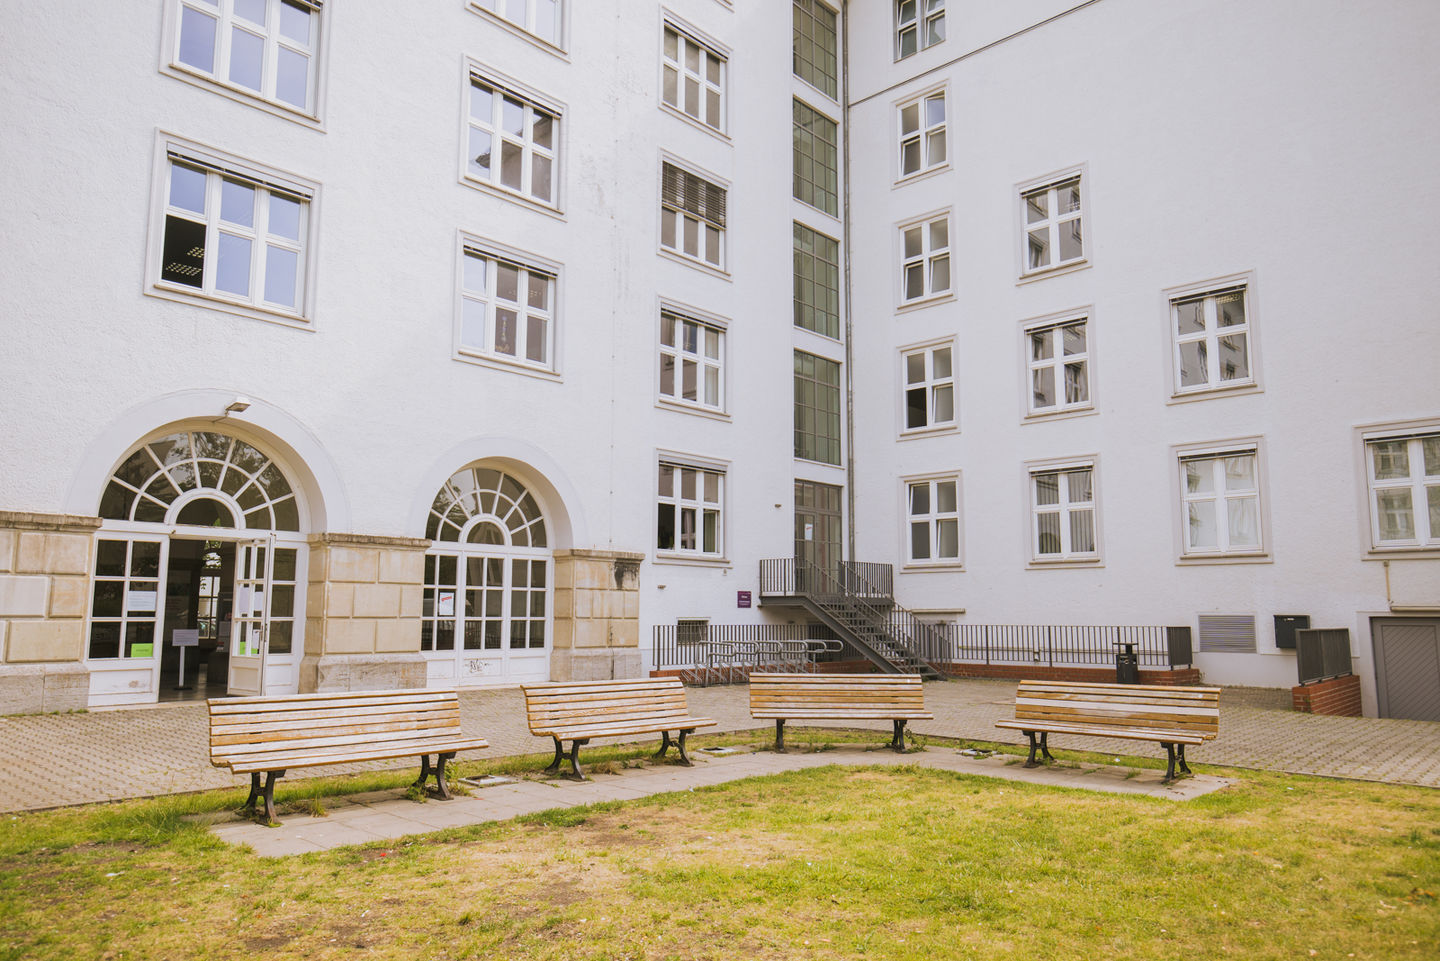 Studying at the Schöneberg Campus of the HWR Berlin: Inner courtyard between House B (back) and House C. Photo: Oana Popa-Costea